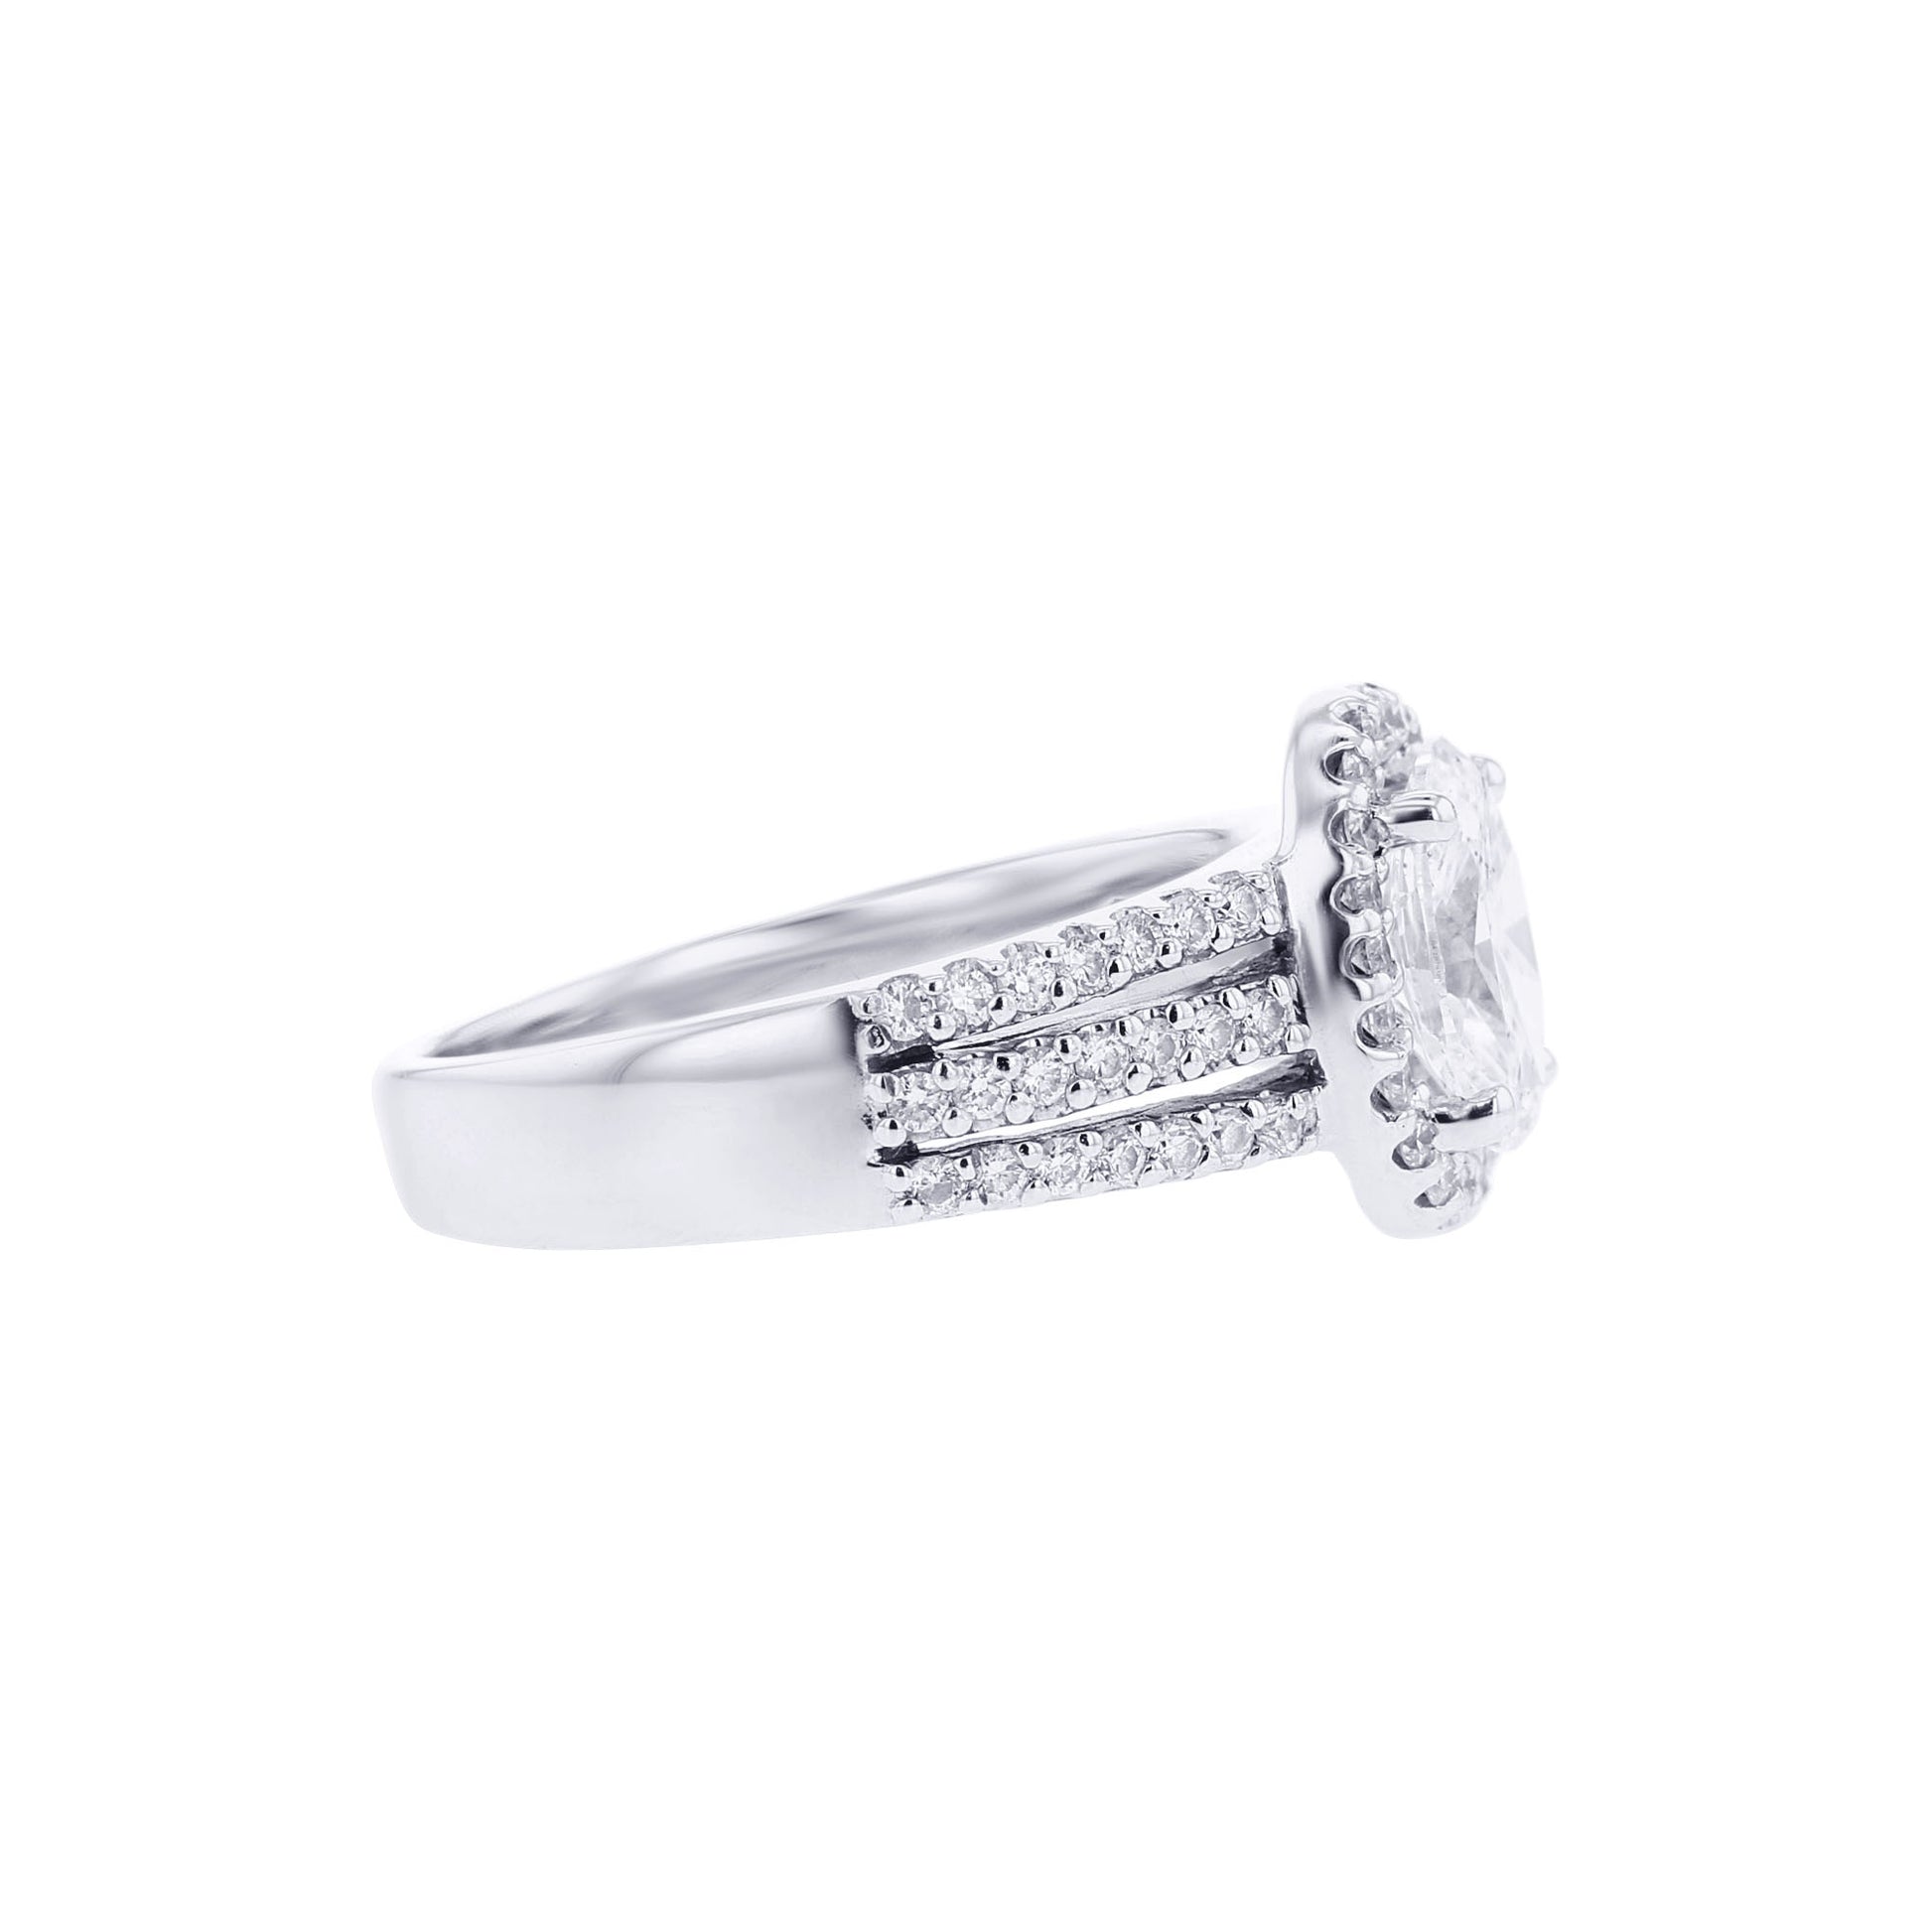 Kaylee Certified Ready for Love Diamond Engagement Ring 1 3/8ct